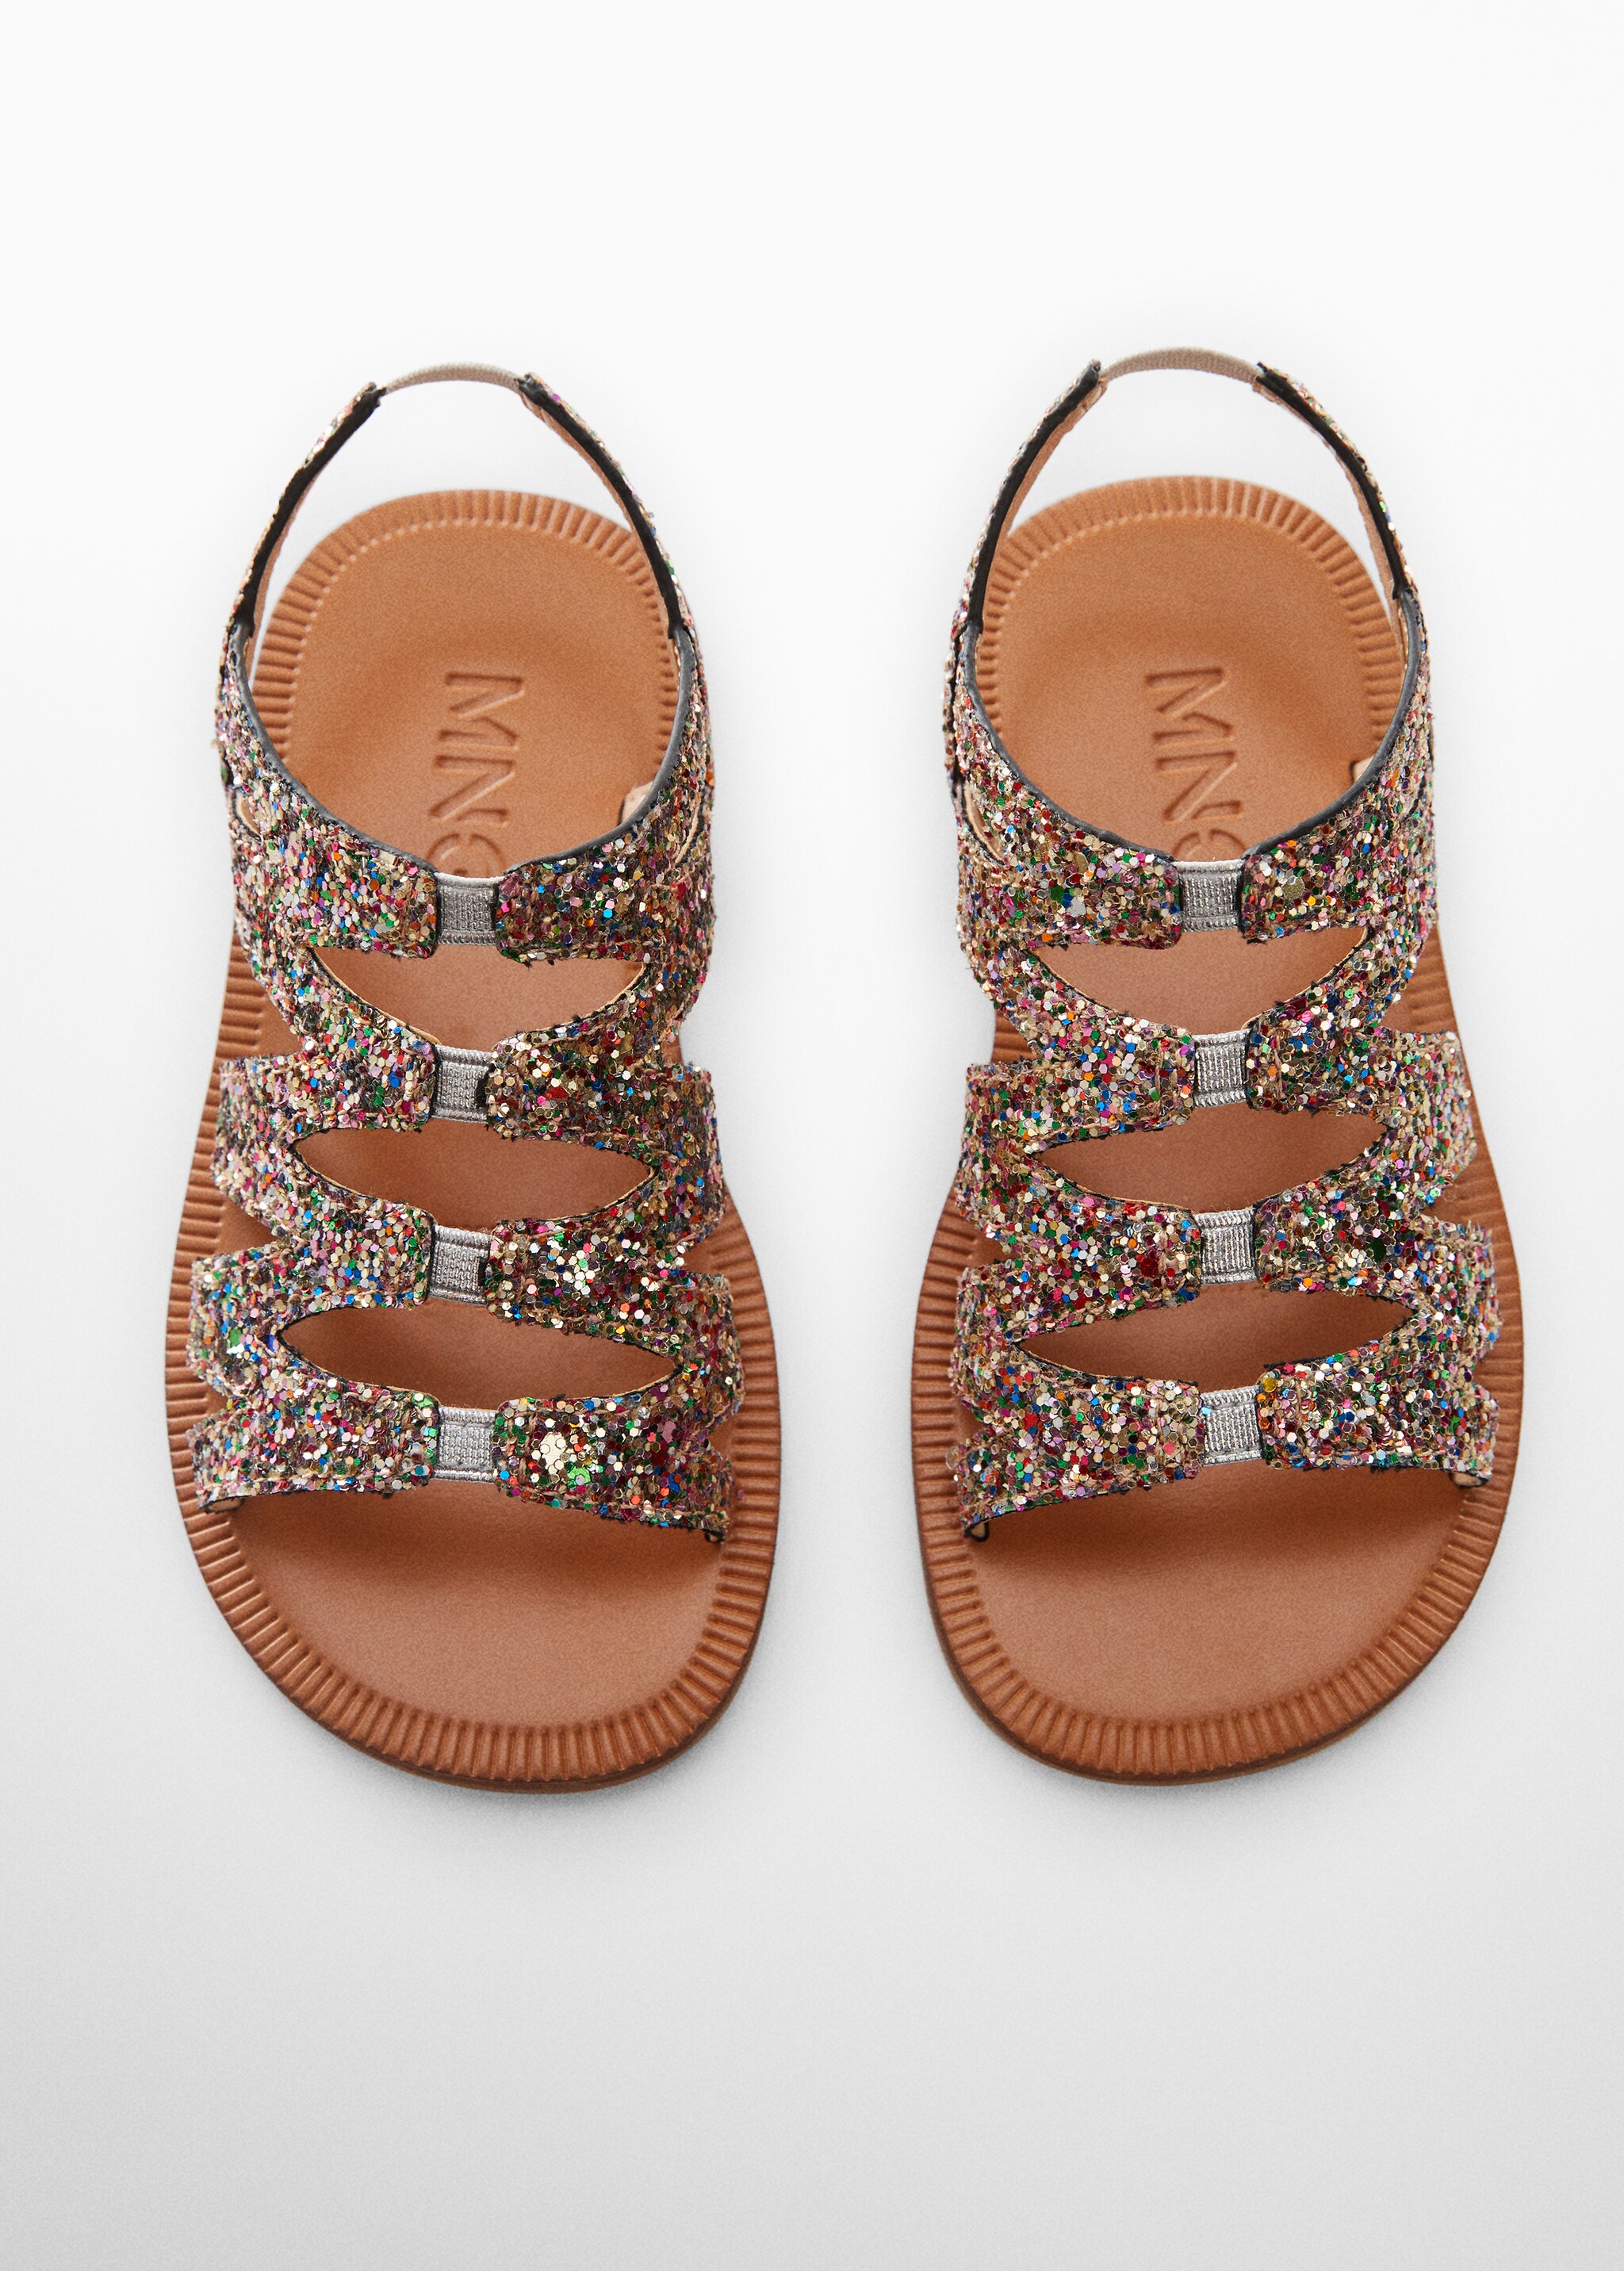 Sequin sandals - Details of the article 3